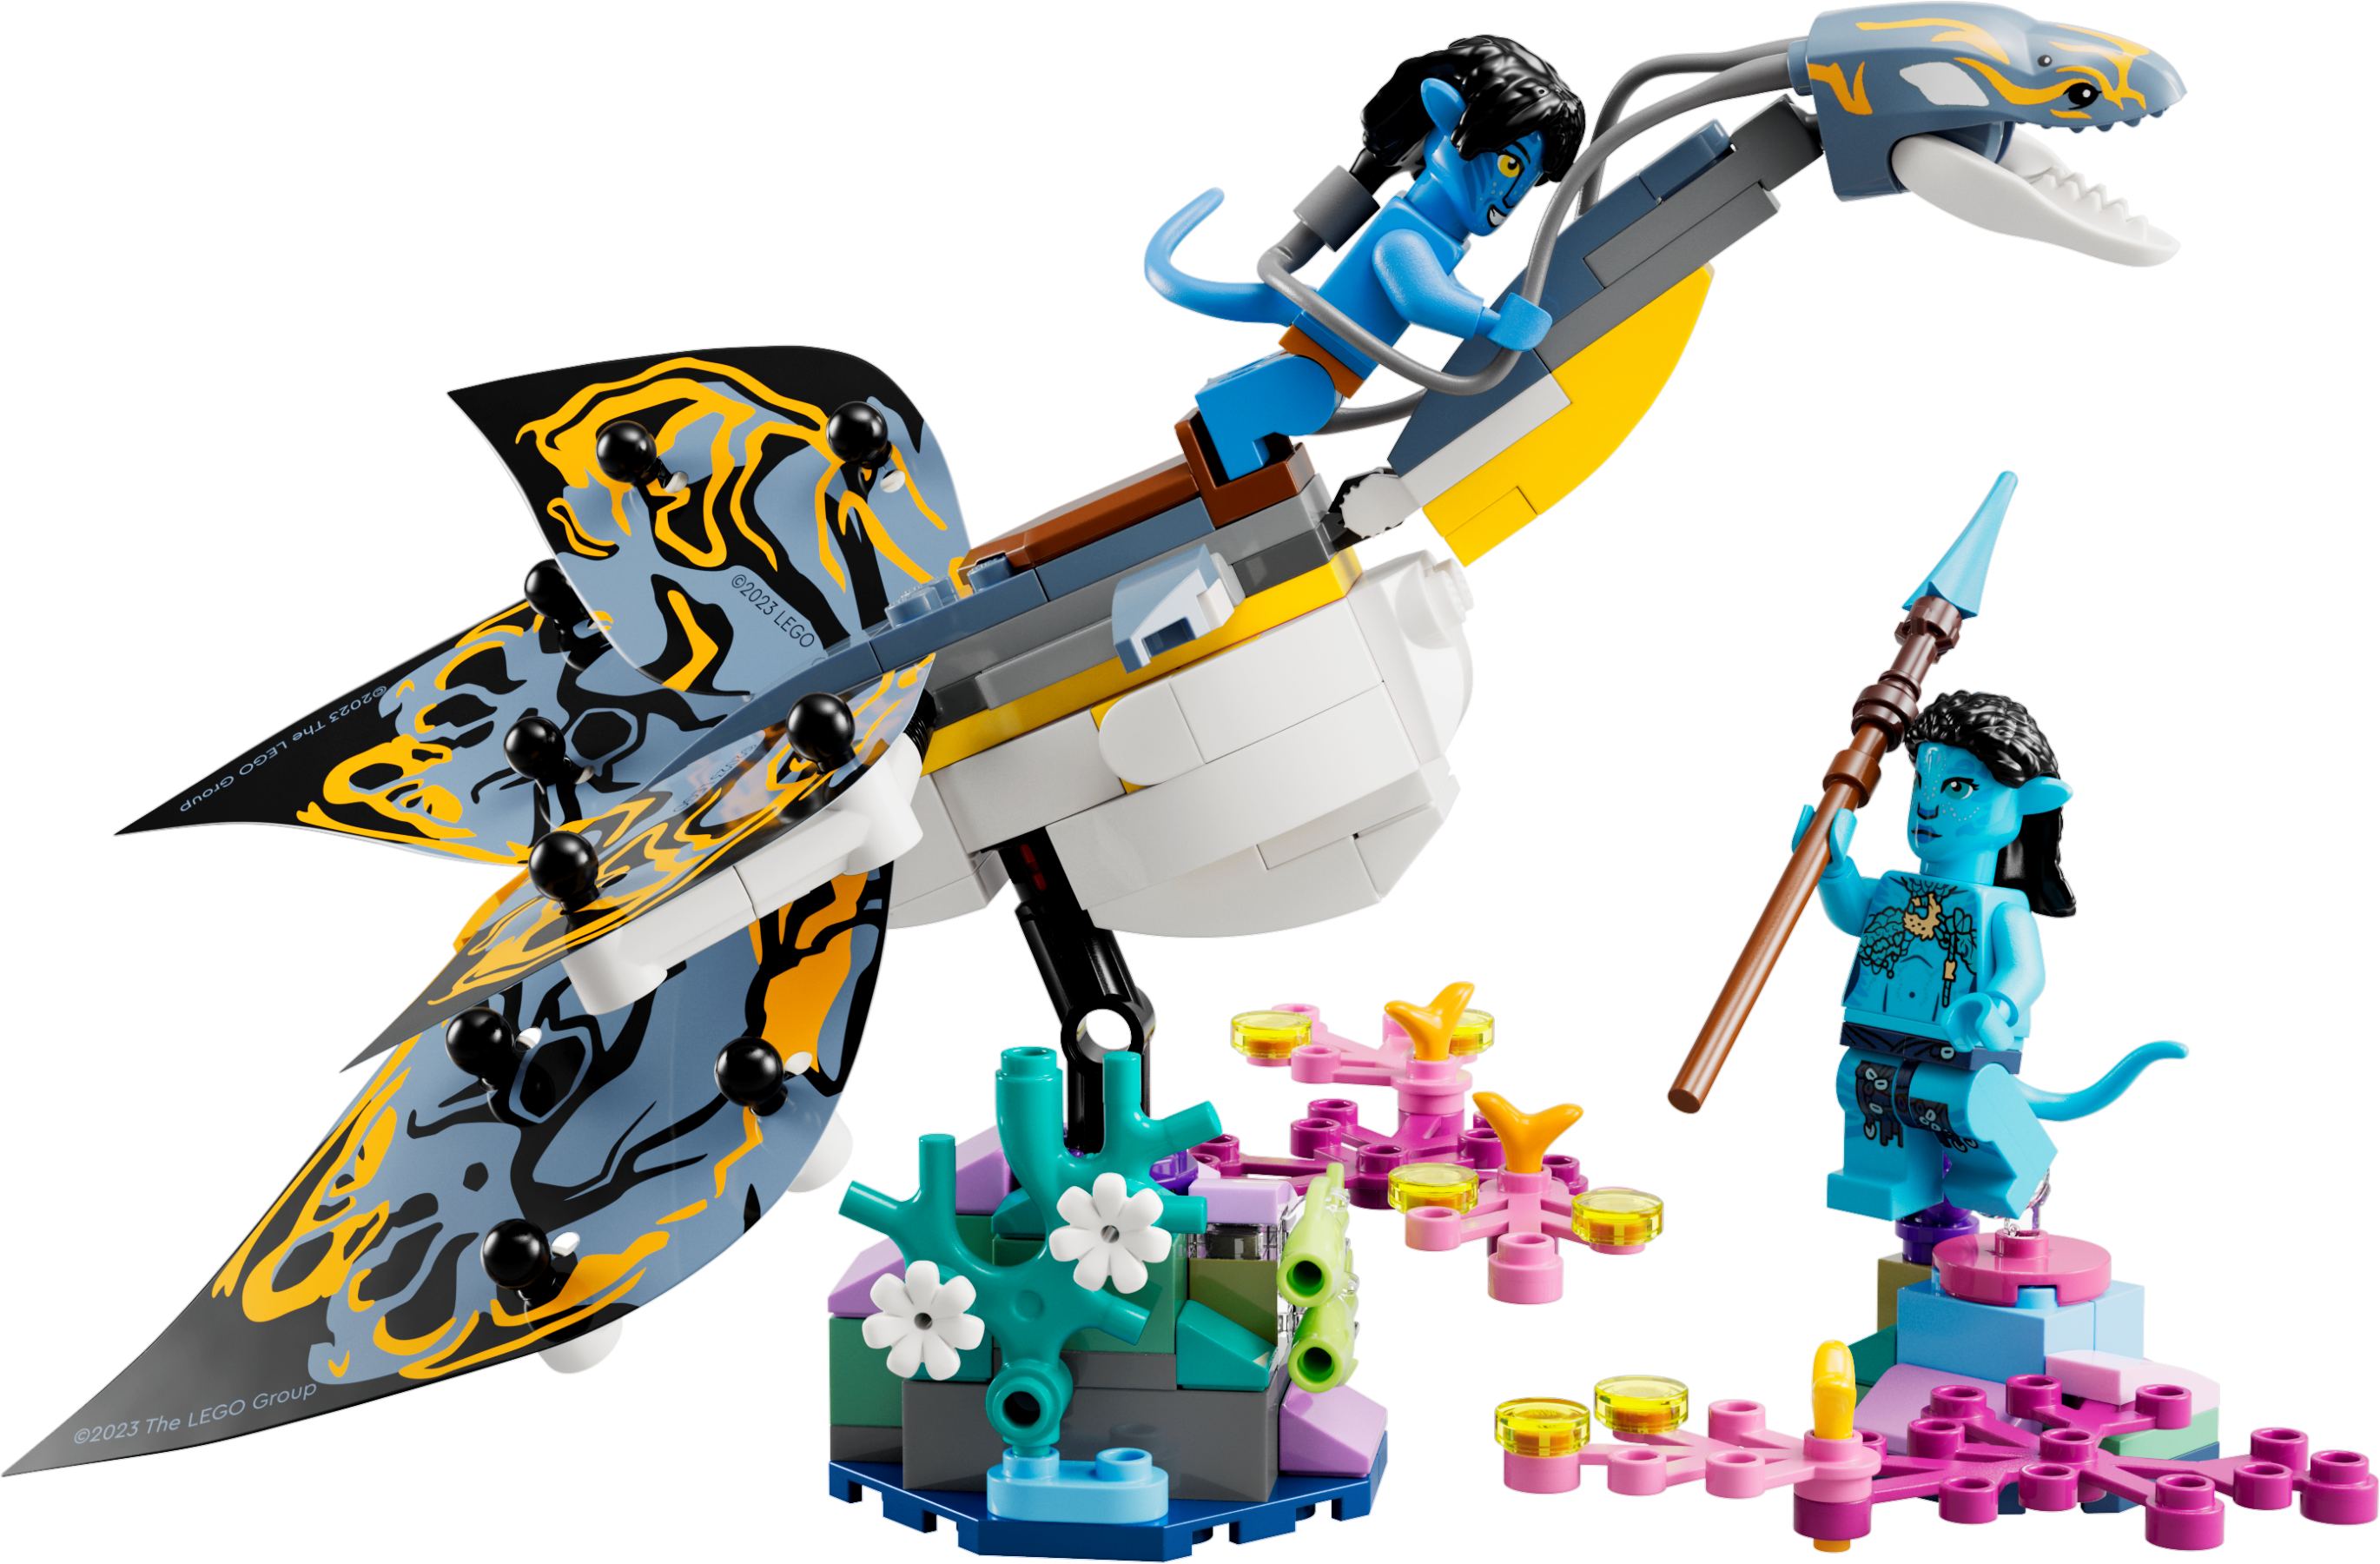 LEGO® Avatar™ – AG LEGO® Certified Stores